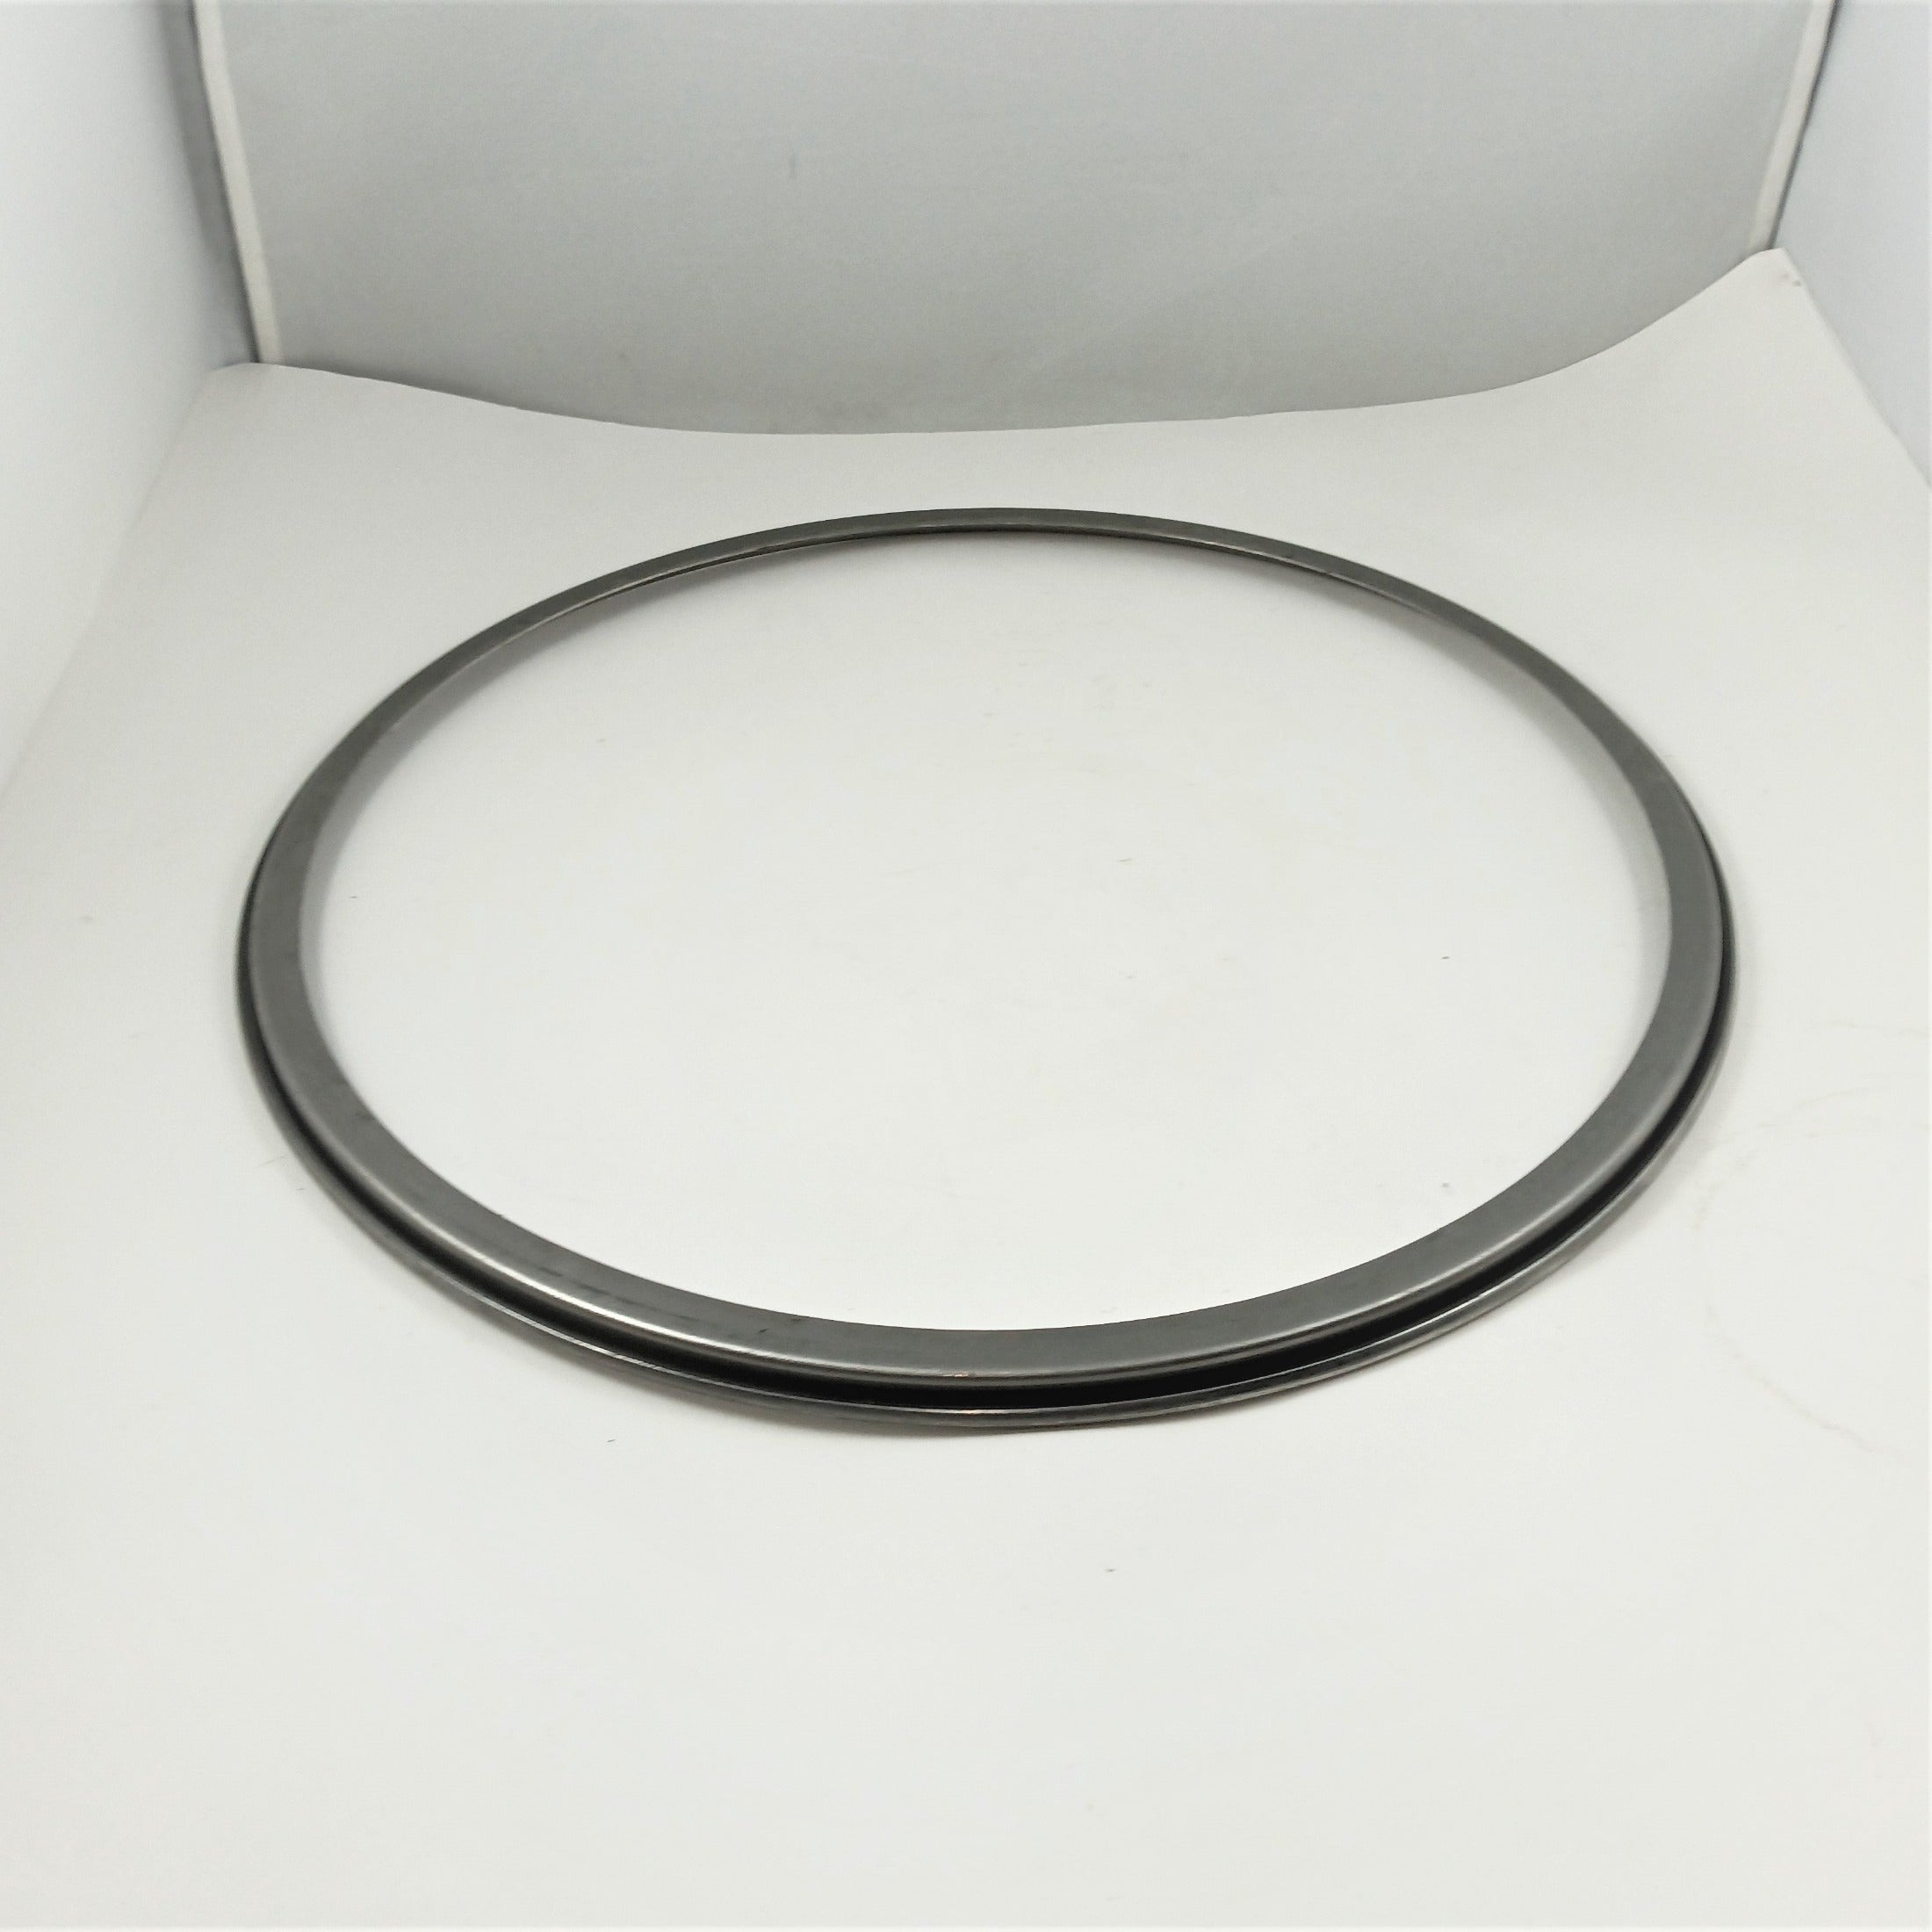 12 inch diameter steel ring - unfinished